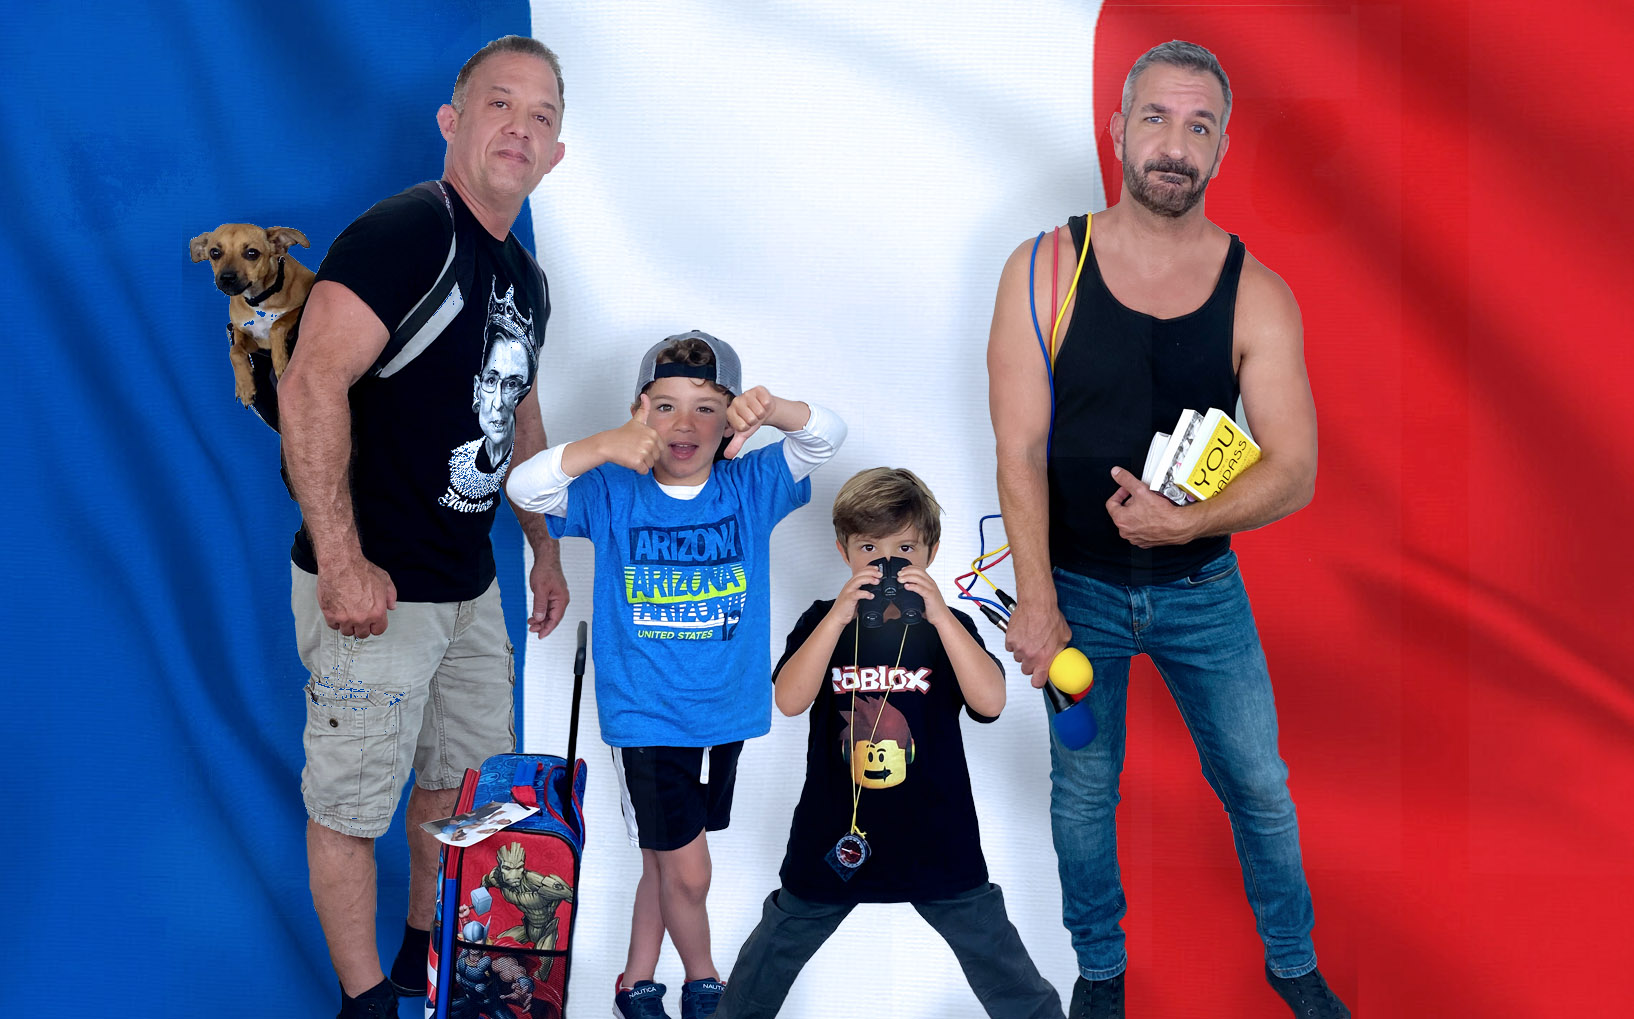 Daddy Squared Around The World: France